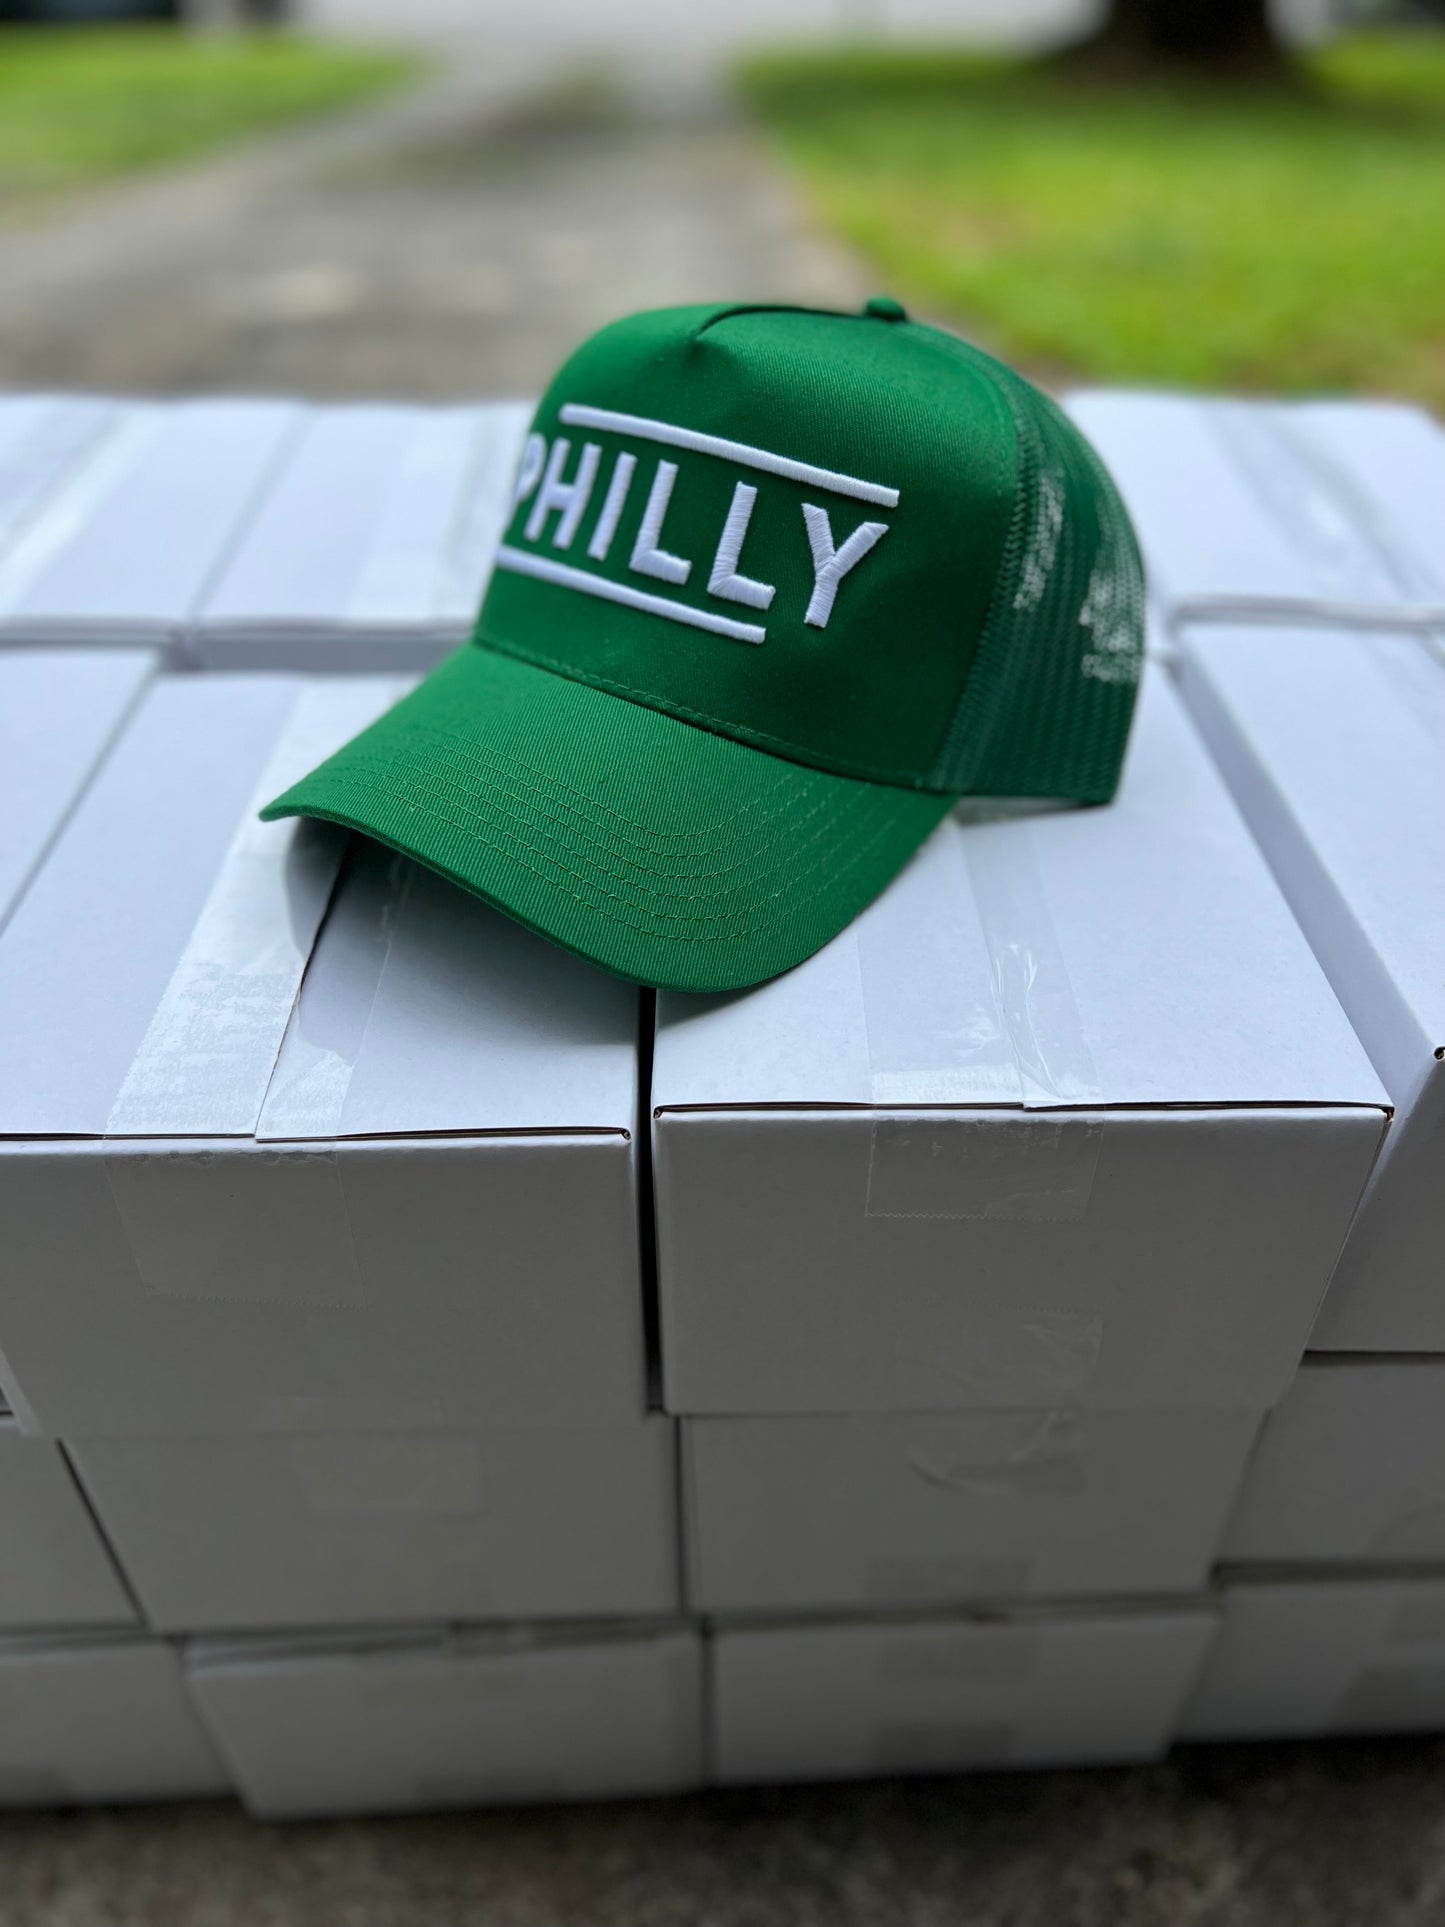 "The System": Philly 3D Hat